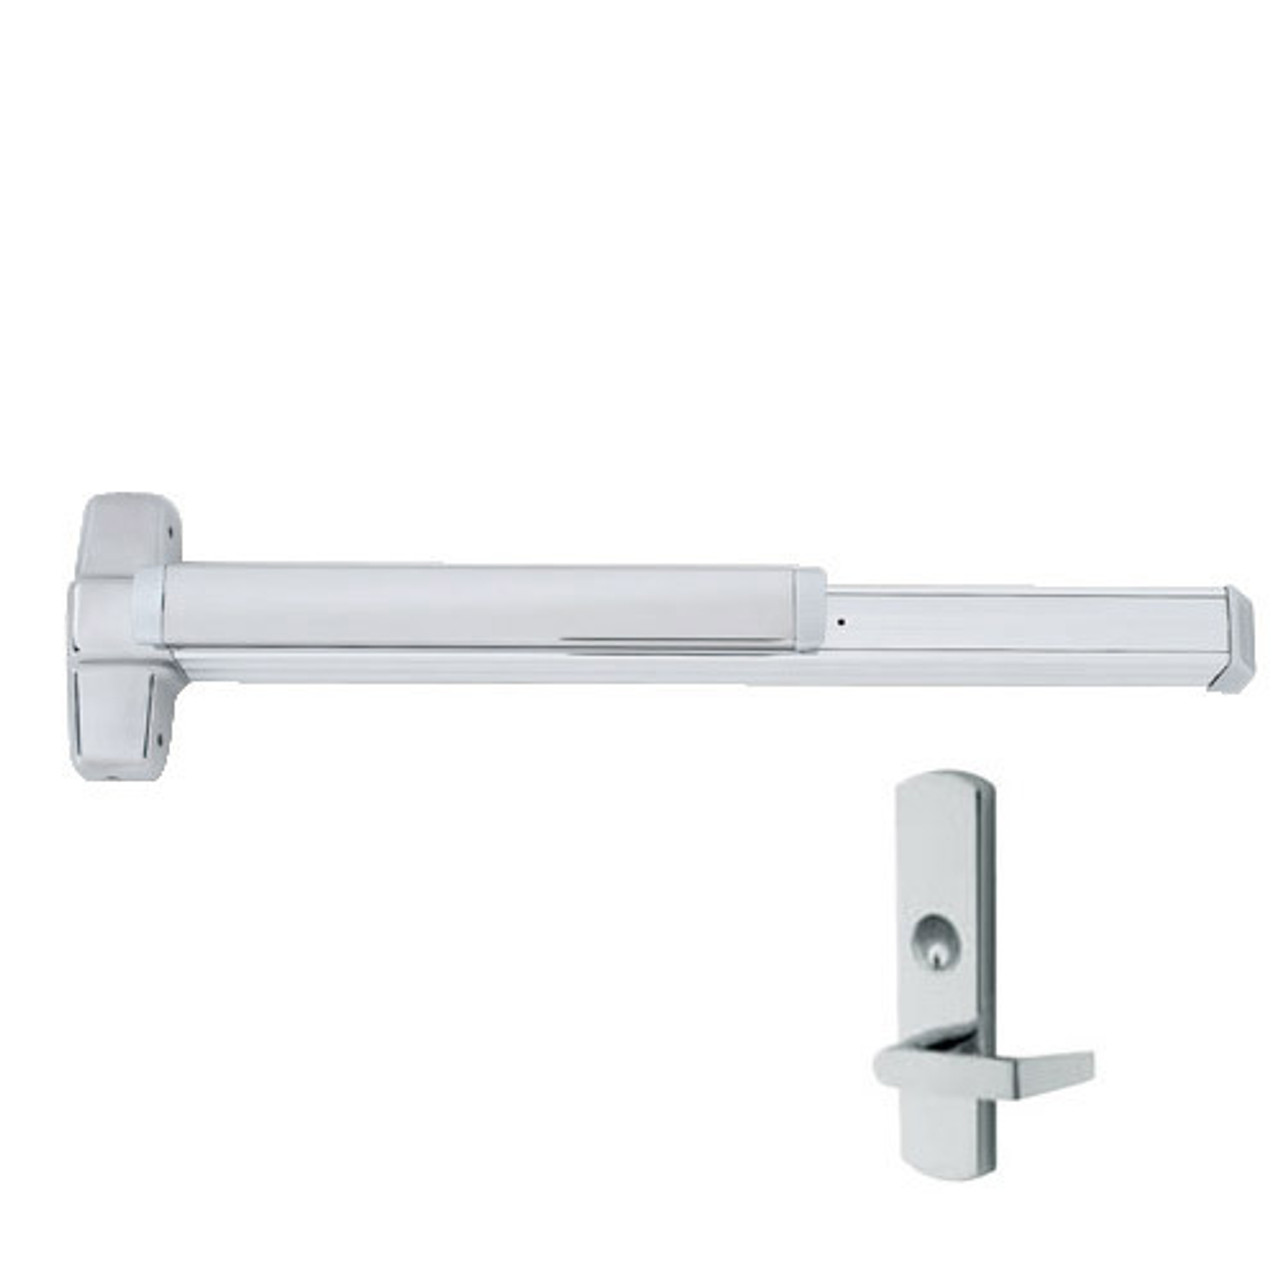 EL9847WDC-L-US28-4-LHR Von Duprin Exit Device with Electric Latch Retraction in Anodized Aluminum